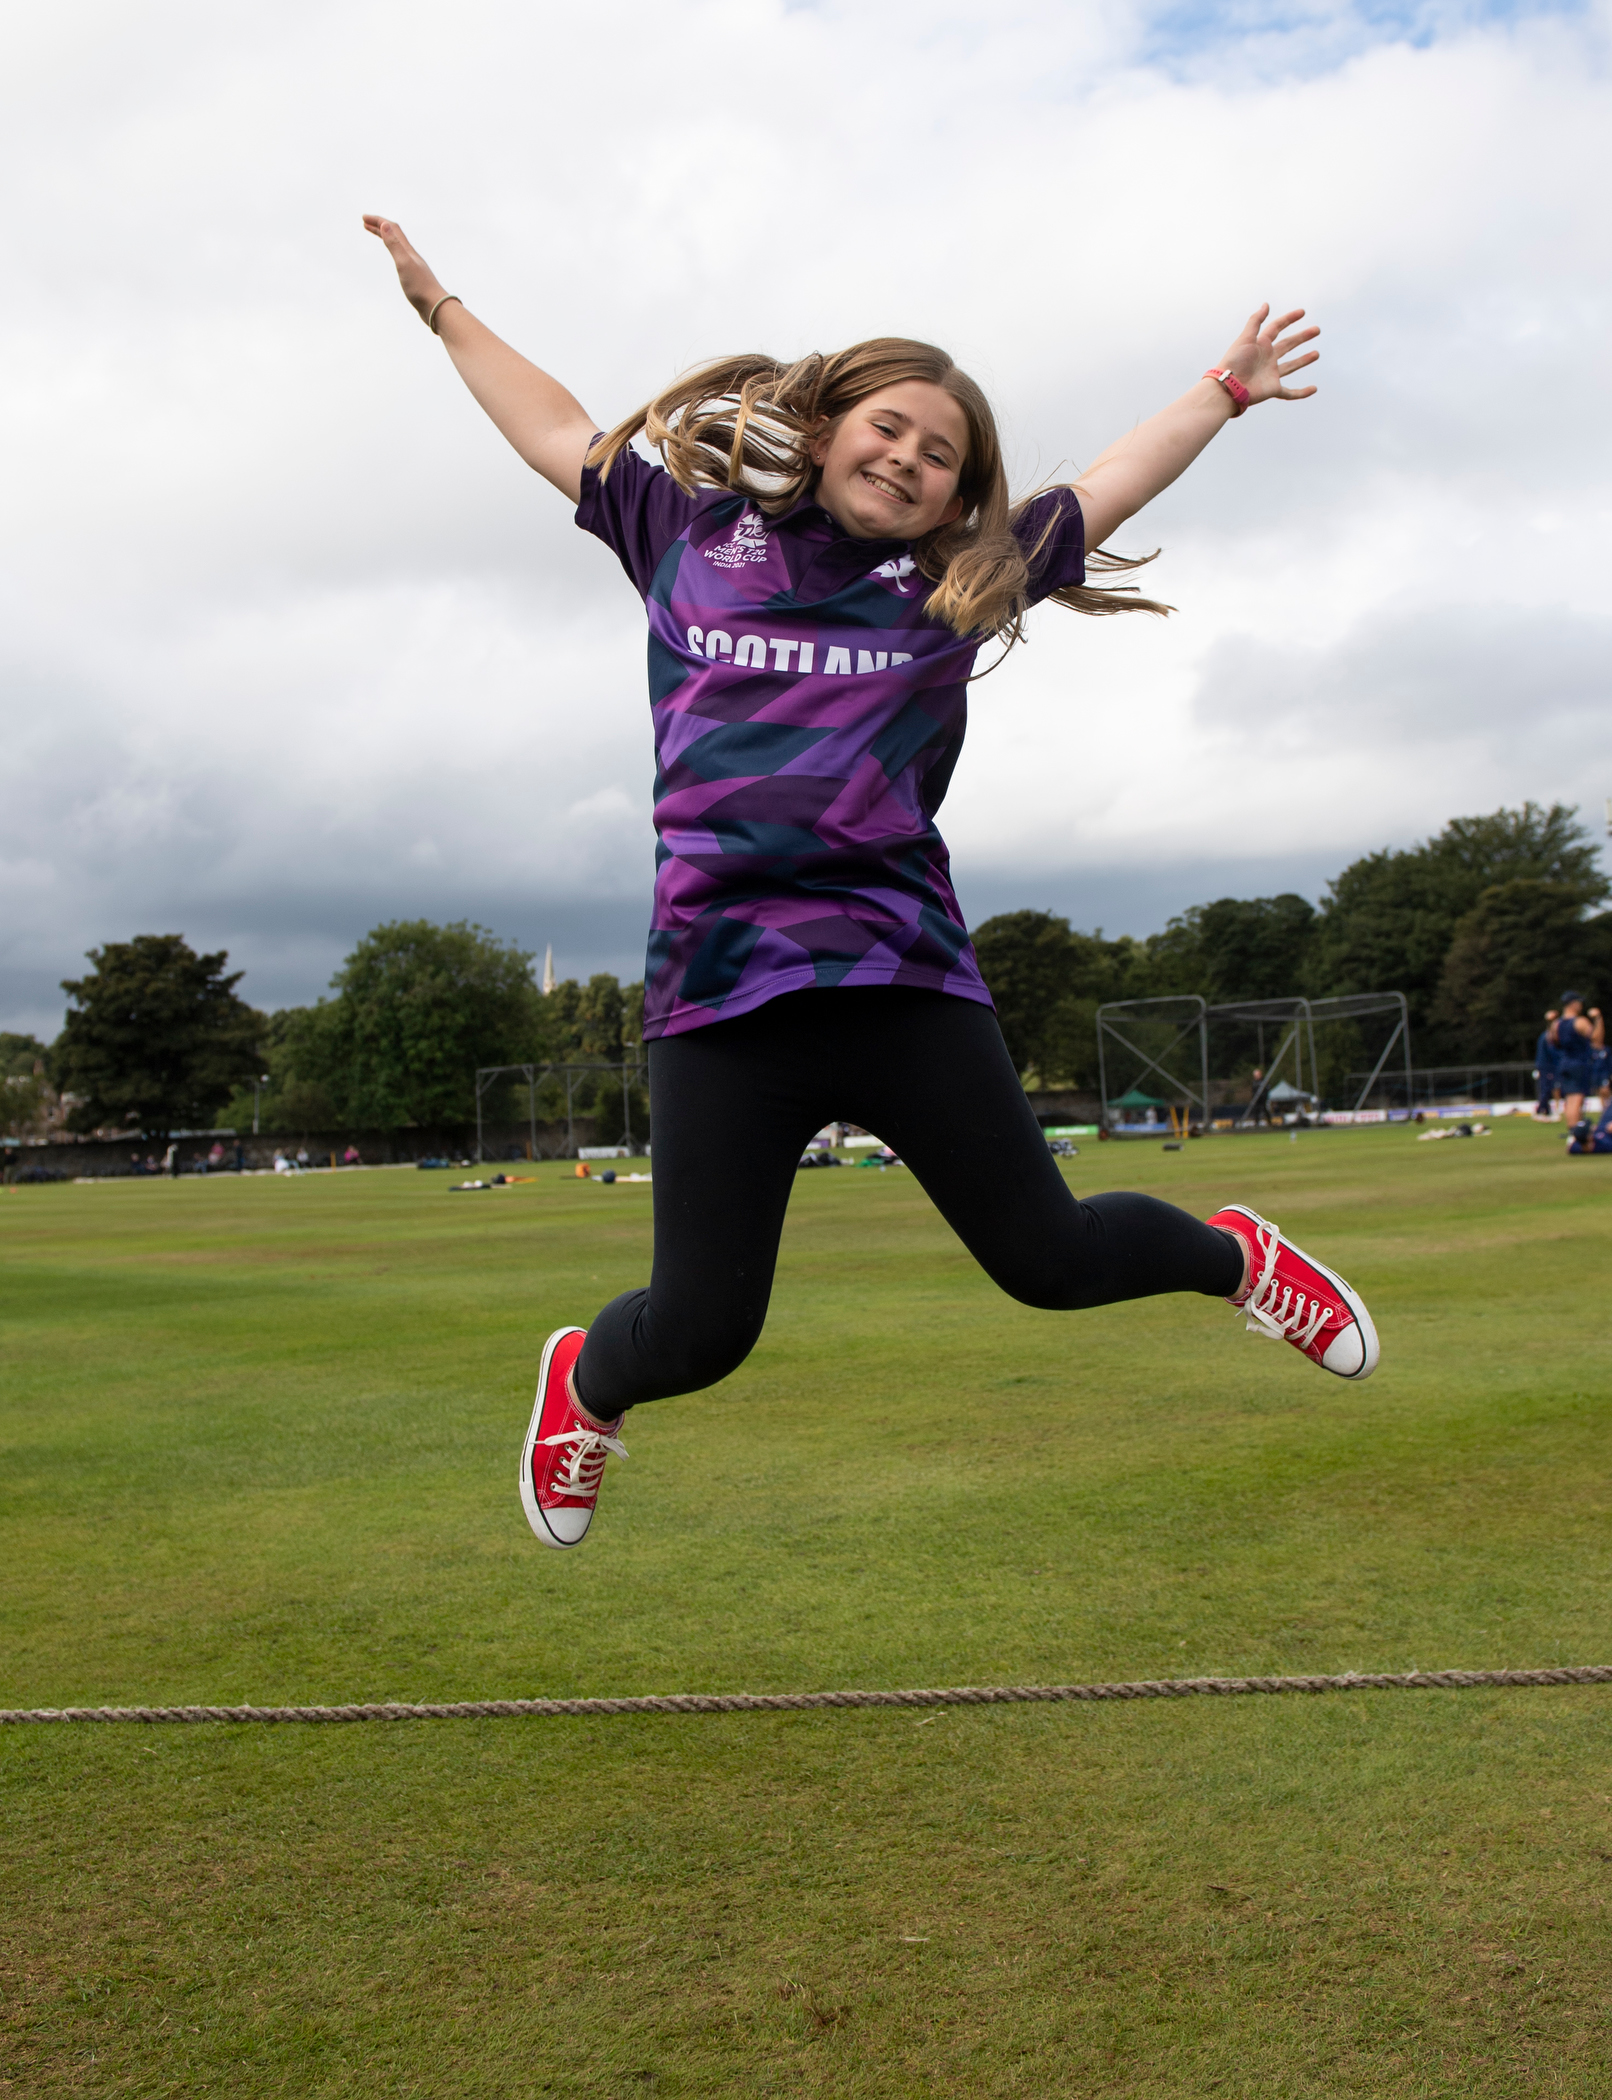 Cricket Scotland launches exciting new shirt design for T20 World Cup Shirt